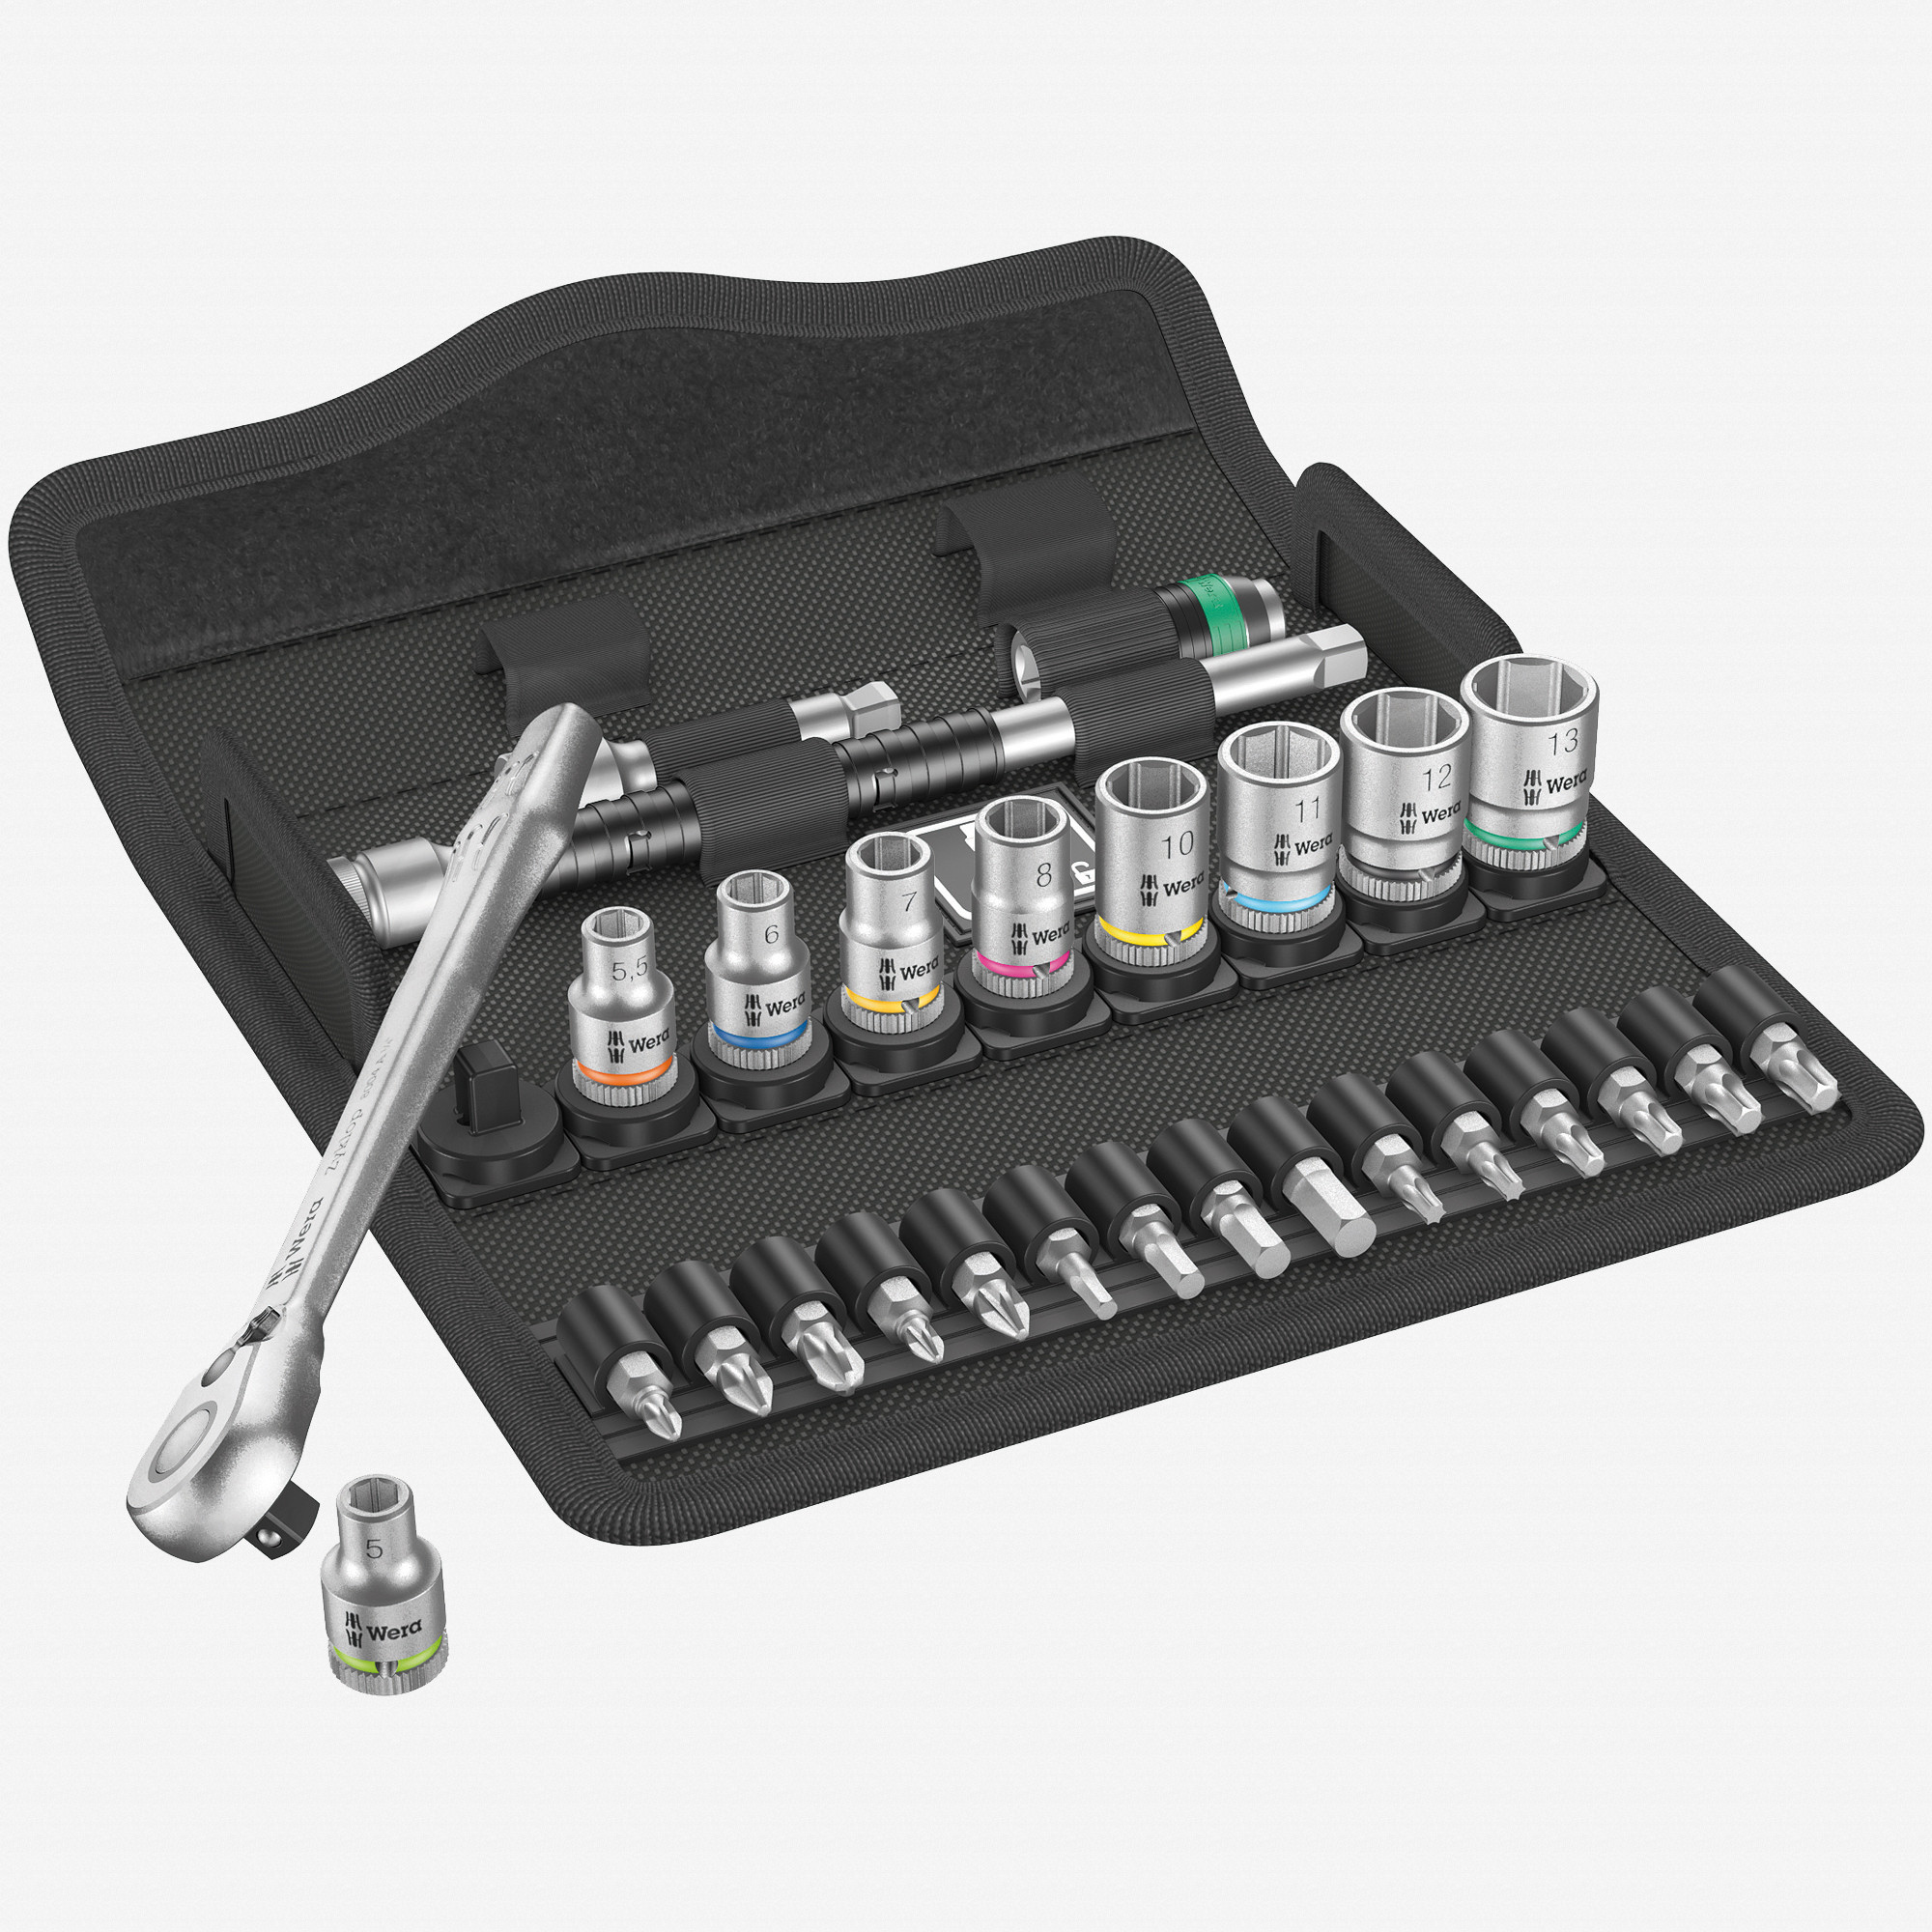 1/4 Square Drive Socket Set with Metric Hex Profile and